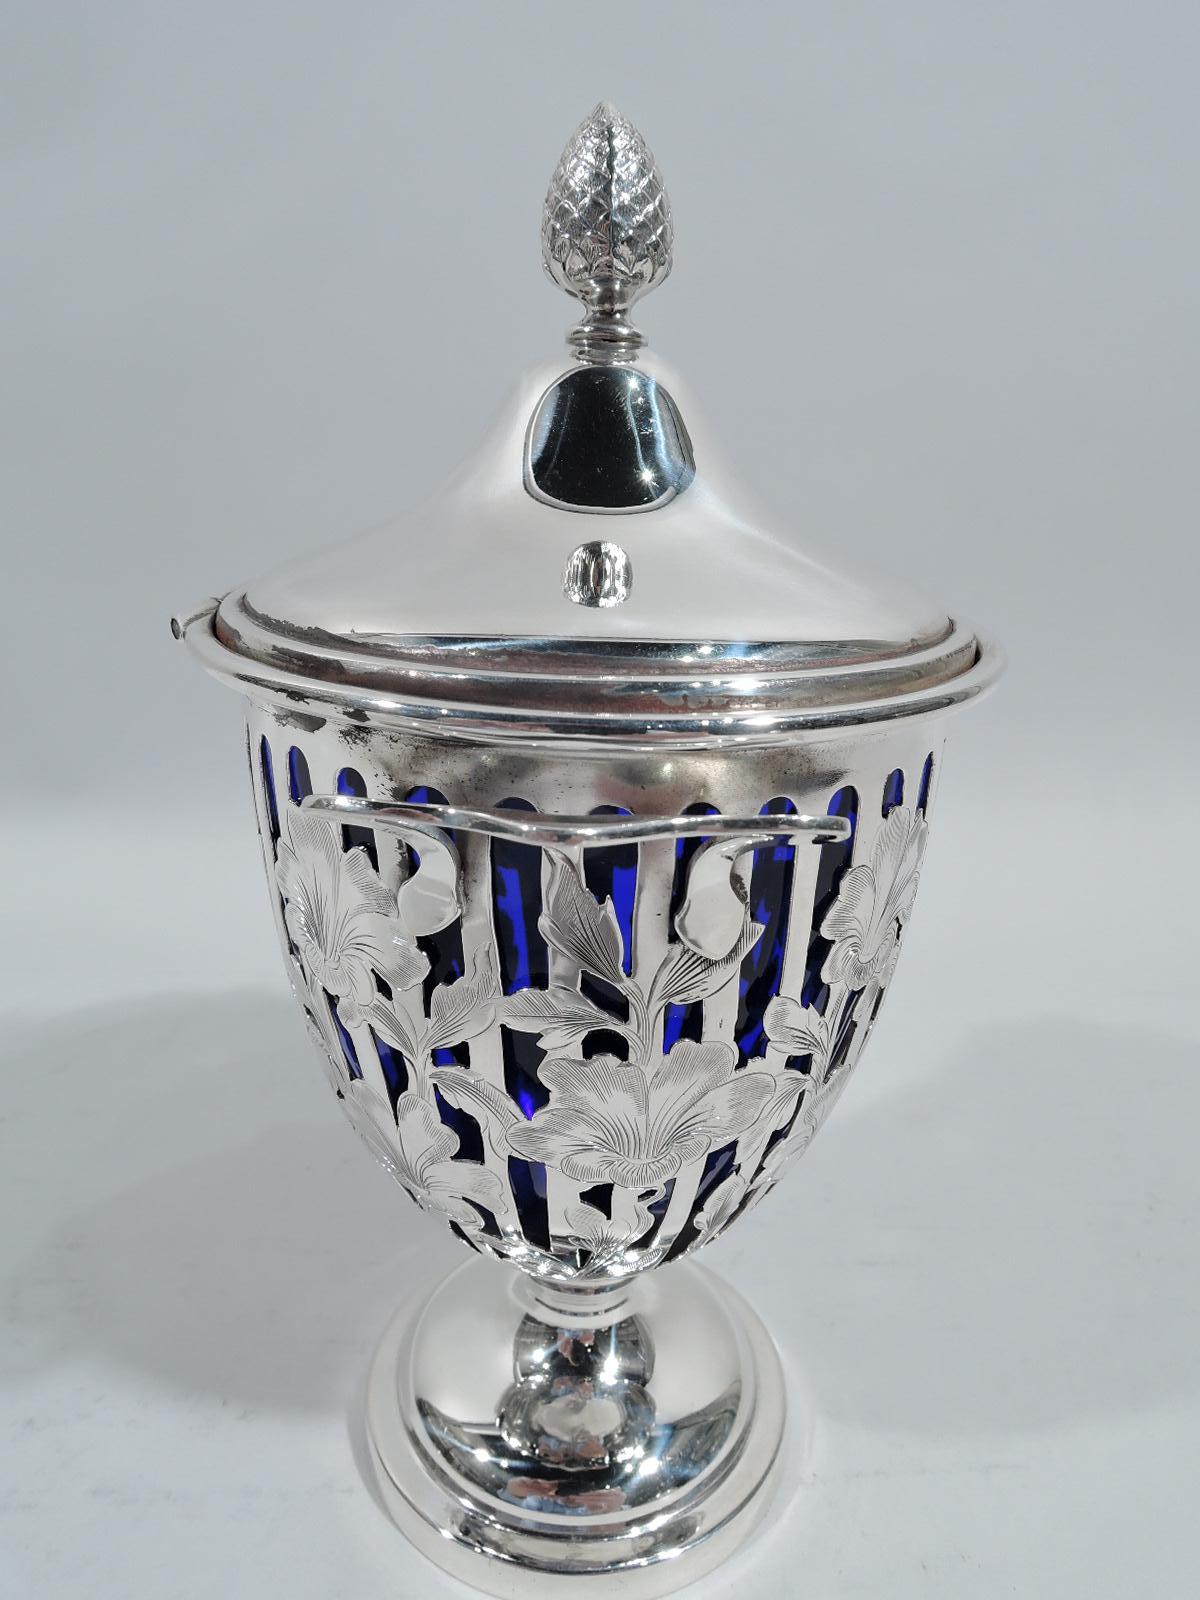 Edwardian Georgian sterling silver condiment jar. Made by George A. Henckel & Co. in New York, ca 1915. Oval bowl with vertical linear piercing overlaid with climbing and overlapping engraved flower heads. Scroll-bracket side handles, hinged and